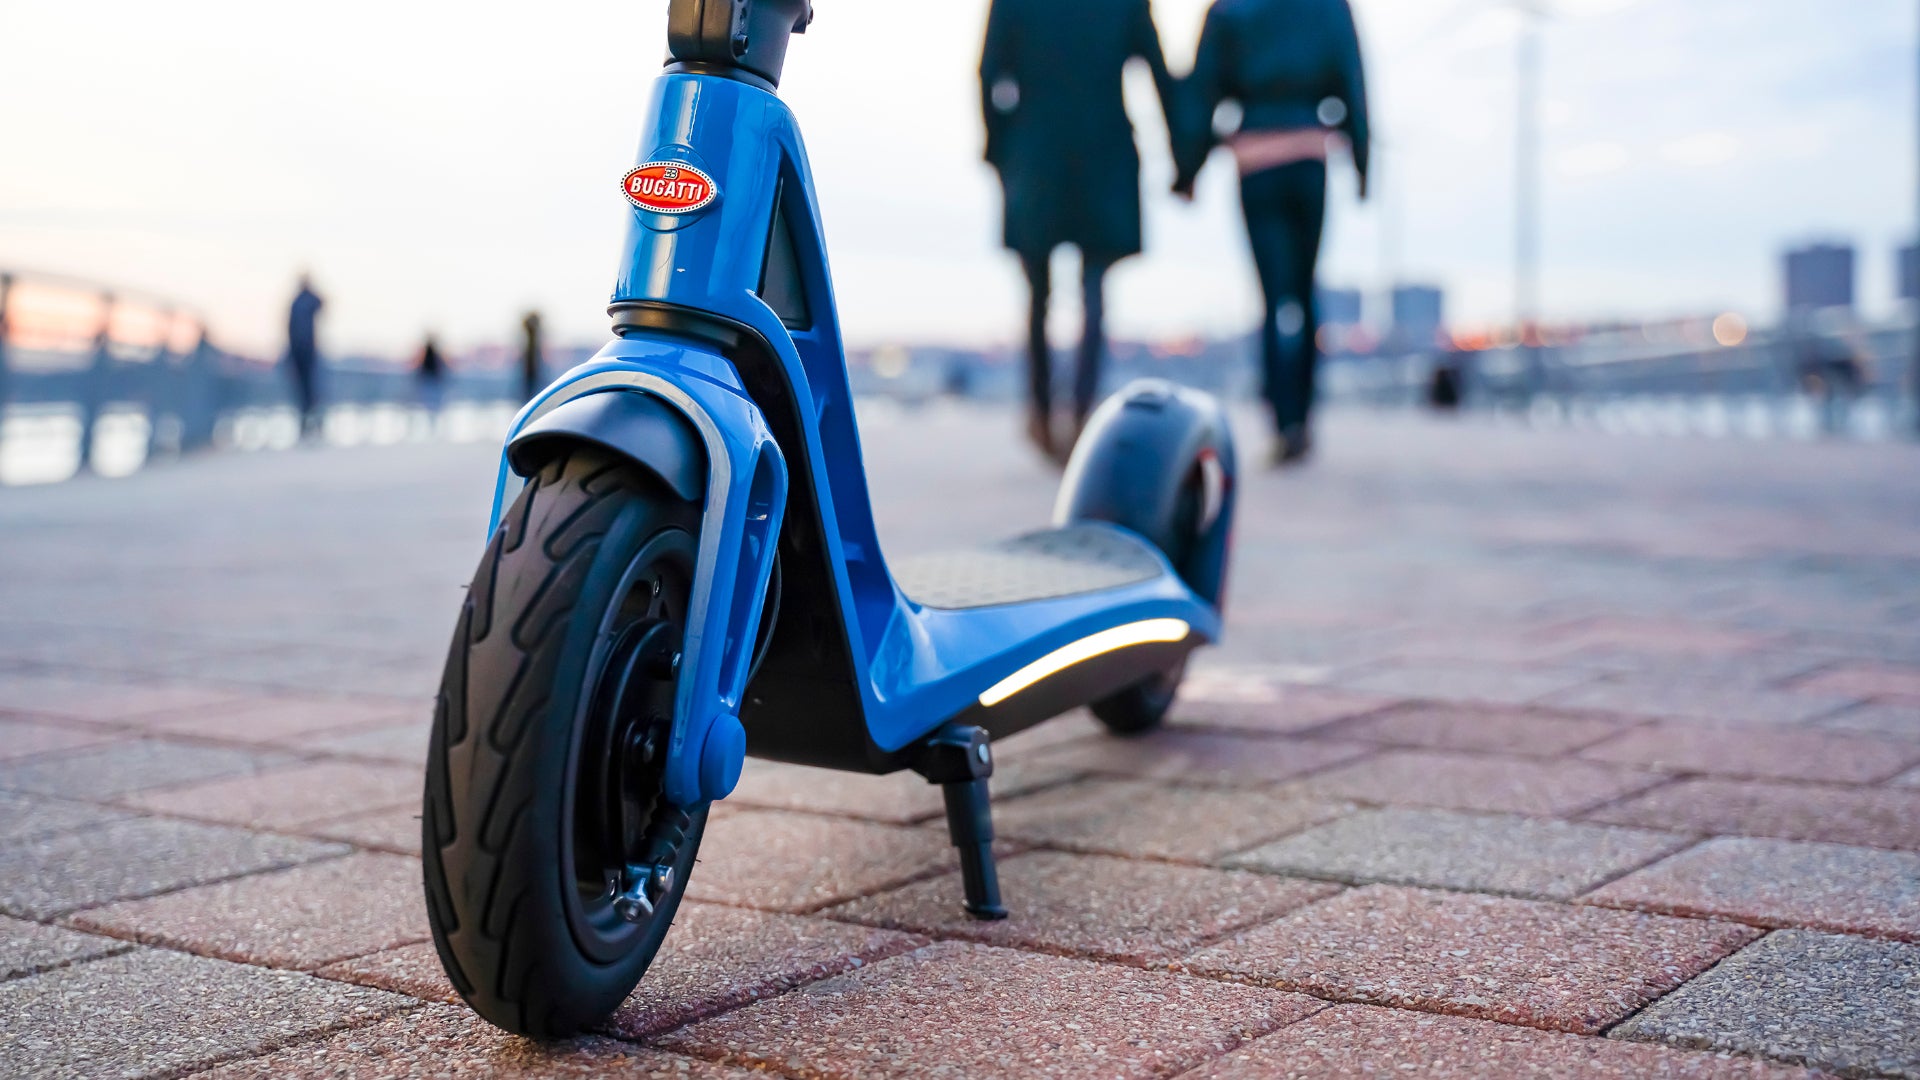 How Fast Does a Bugatti Electric Scooter Go